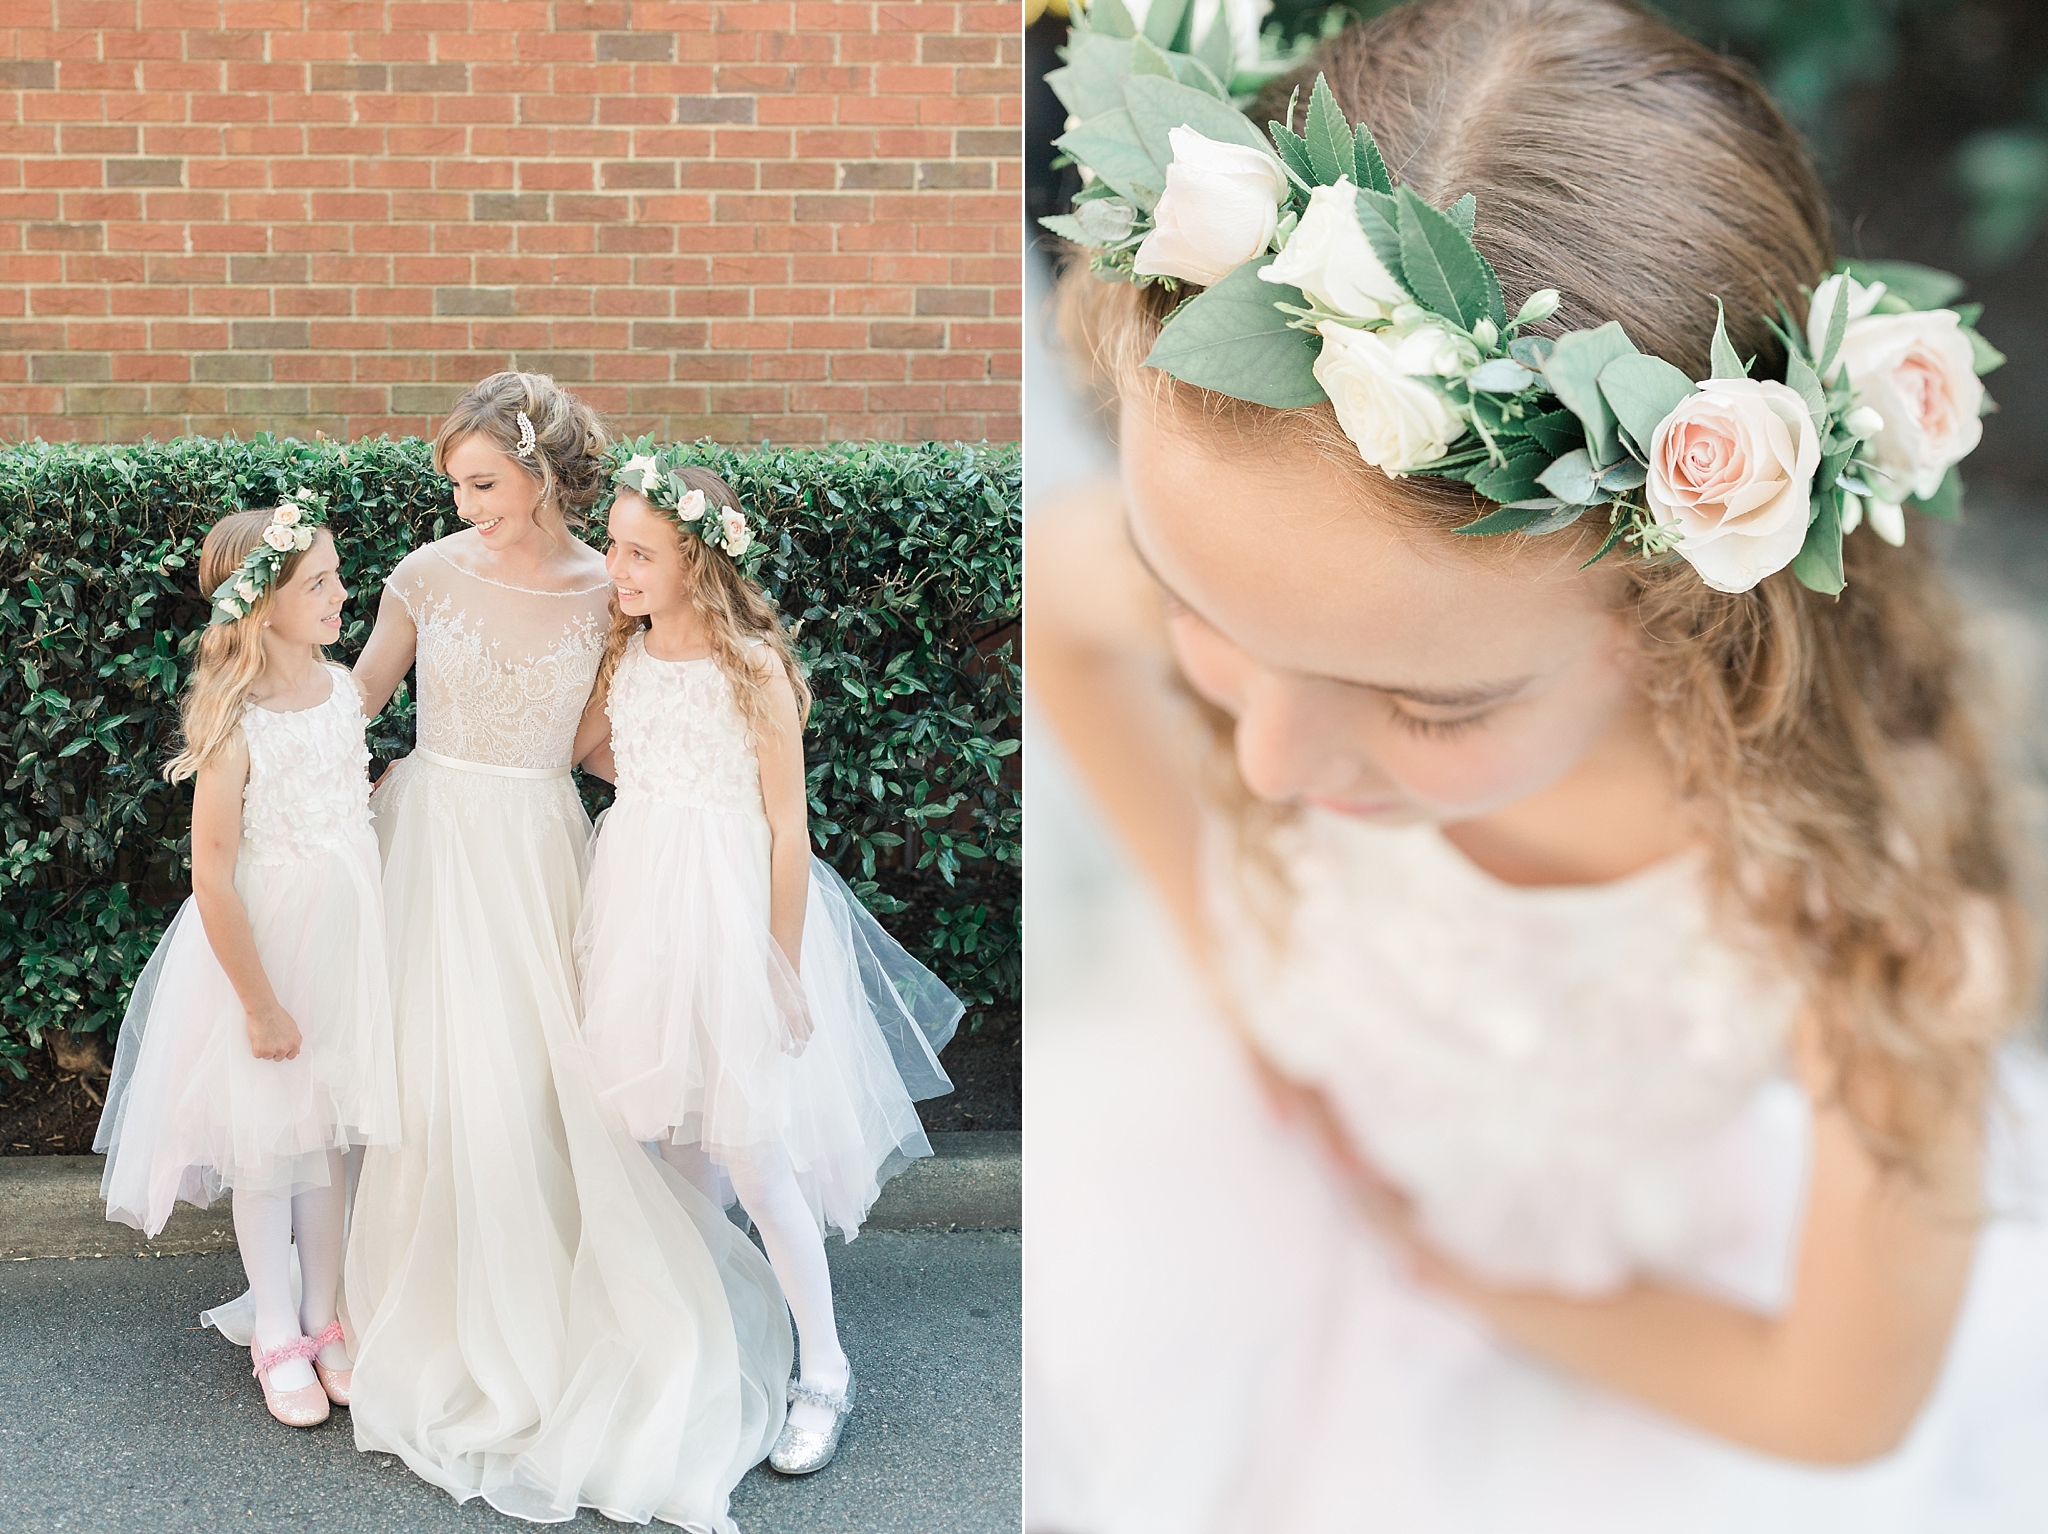 This ballet inspired Country Club of Virginia wedding was one for the books! As captured by DC wedding photographer, Alicia Lacey